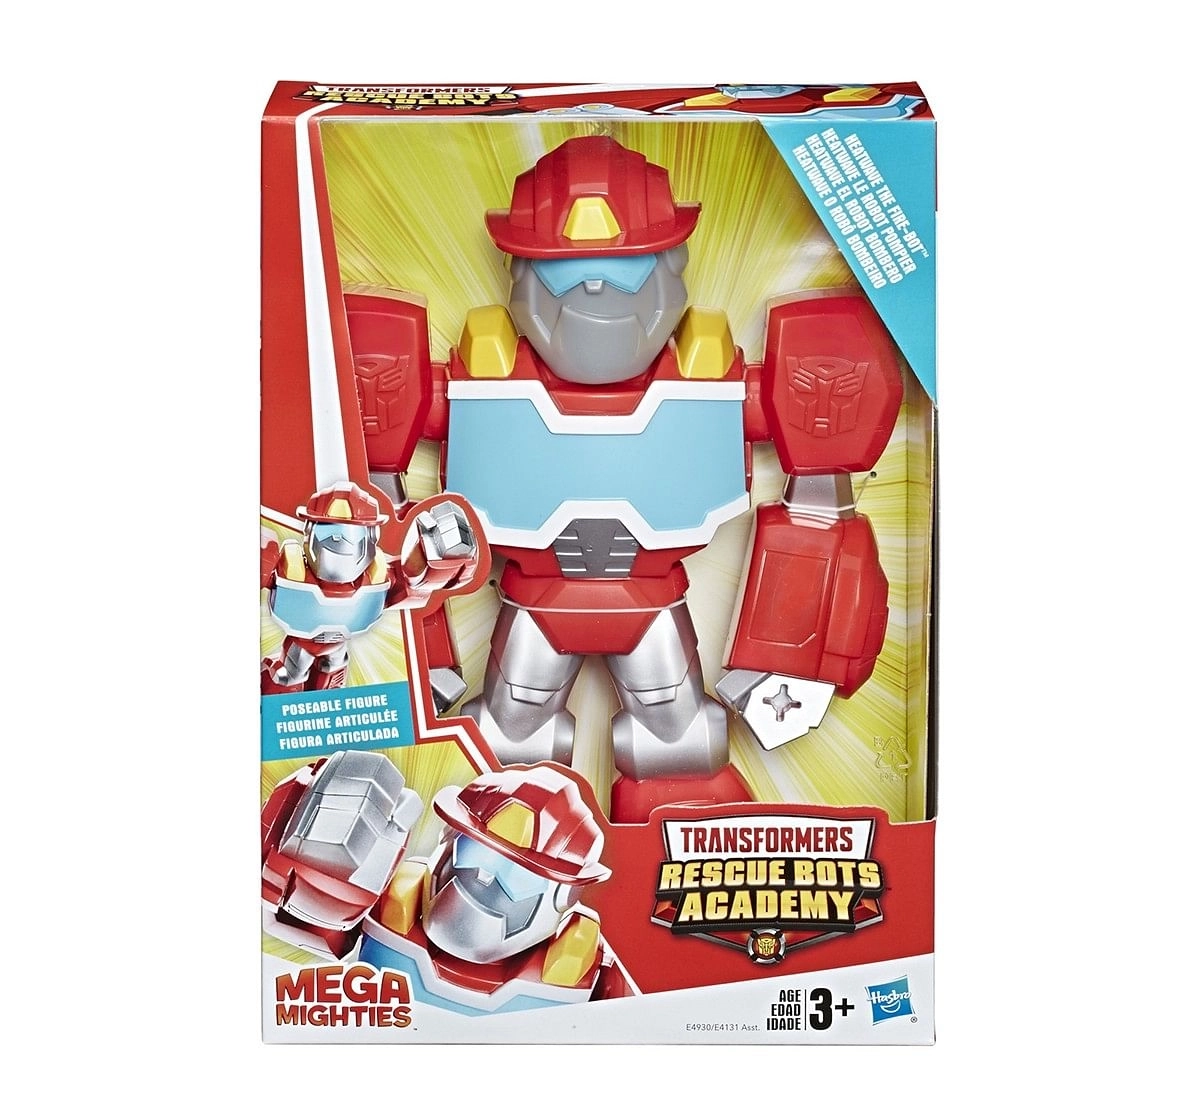 Playskool Heroes Transformers Rescue Bots Academy Mega Mighties Heatwave The Fire-Bot Activity Toys for Kids age 3Y+ 